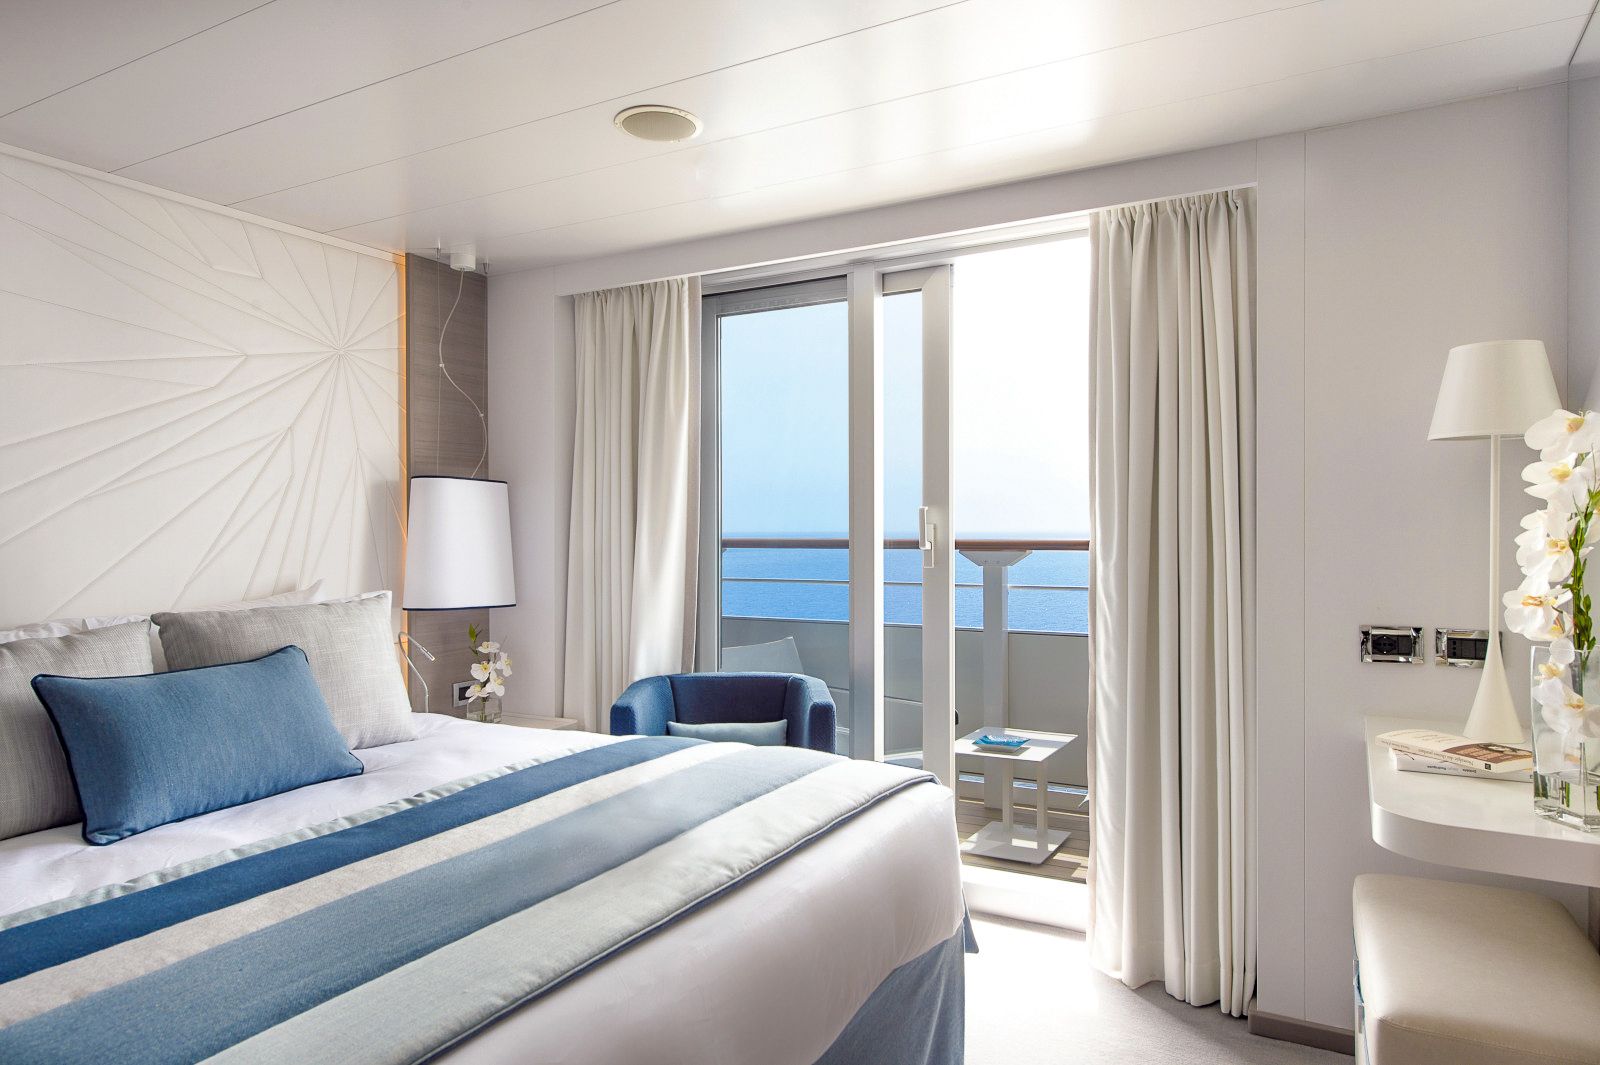 Guest suite onboard Ponant's Le Lyrial cruise ship in the Arctic